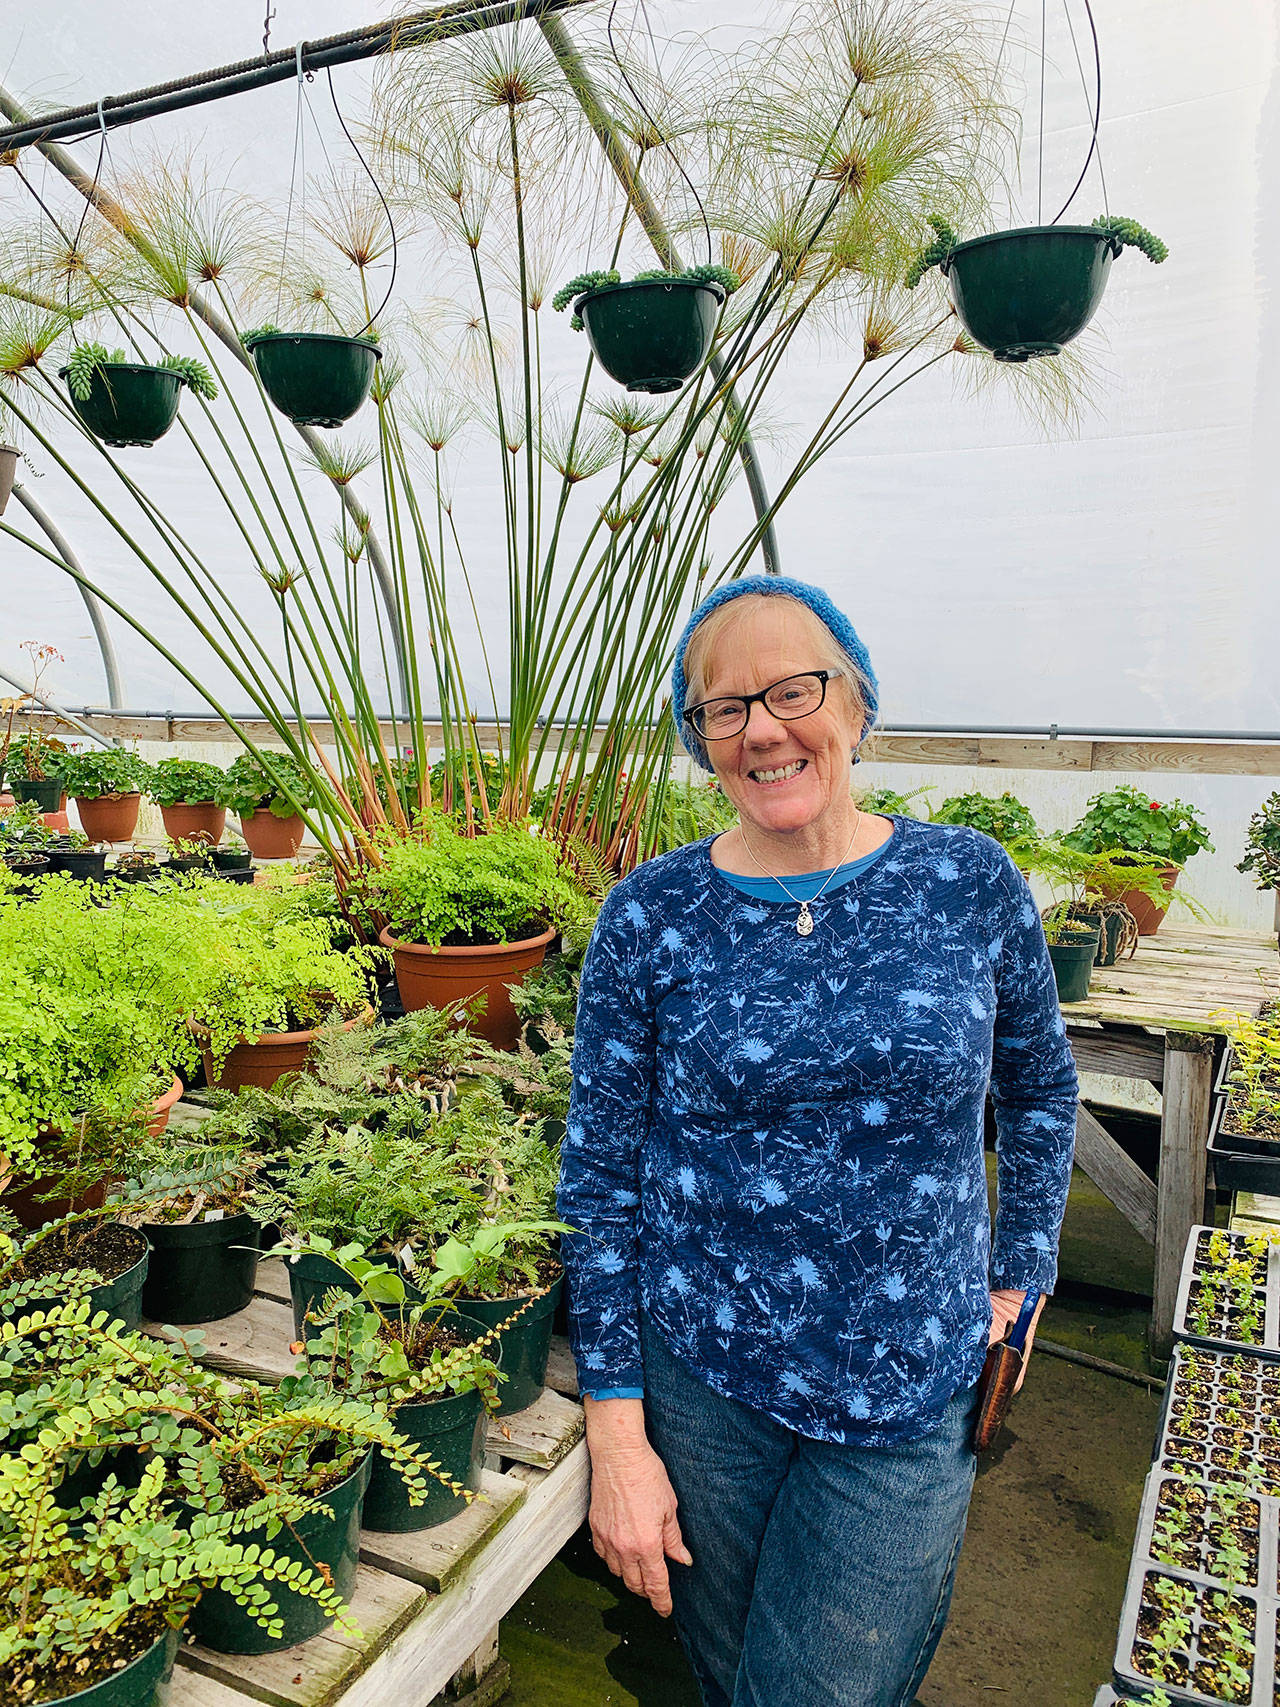 Leilani Wood shares a smile after nourishing the plants — and her soul — in one of many Sunny Farms’ greenhouses she co-manages. Photo by Betty Harriman